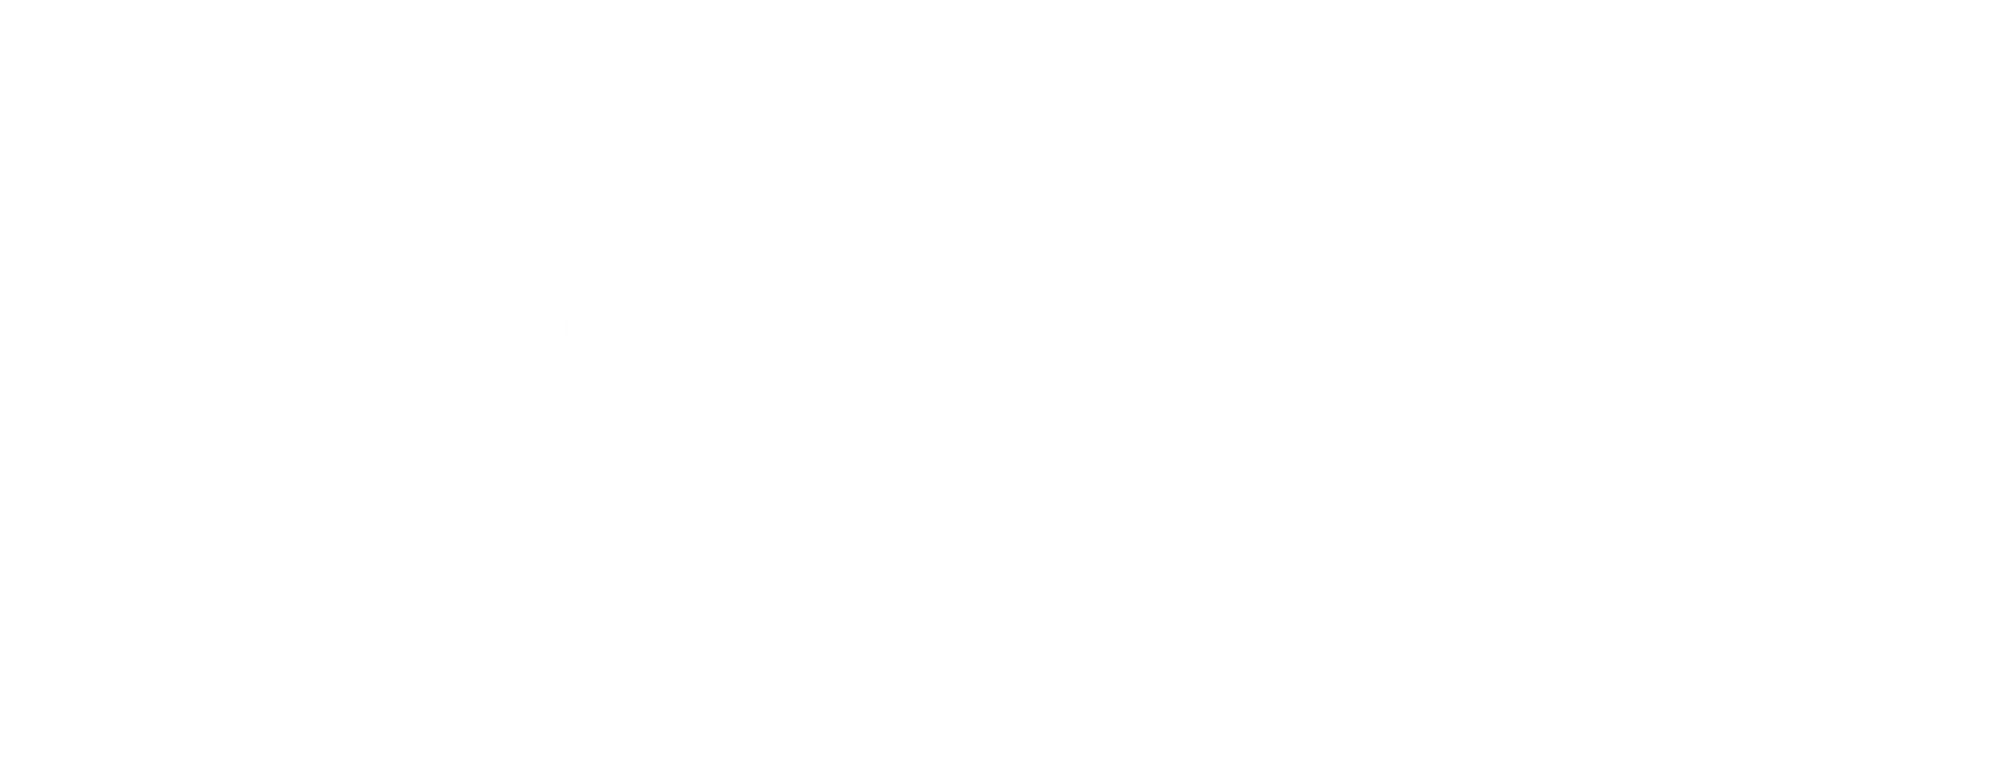 The Hidden Orchard Project